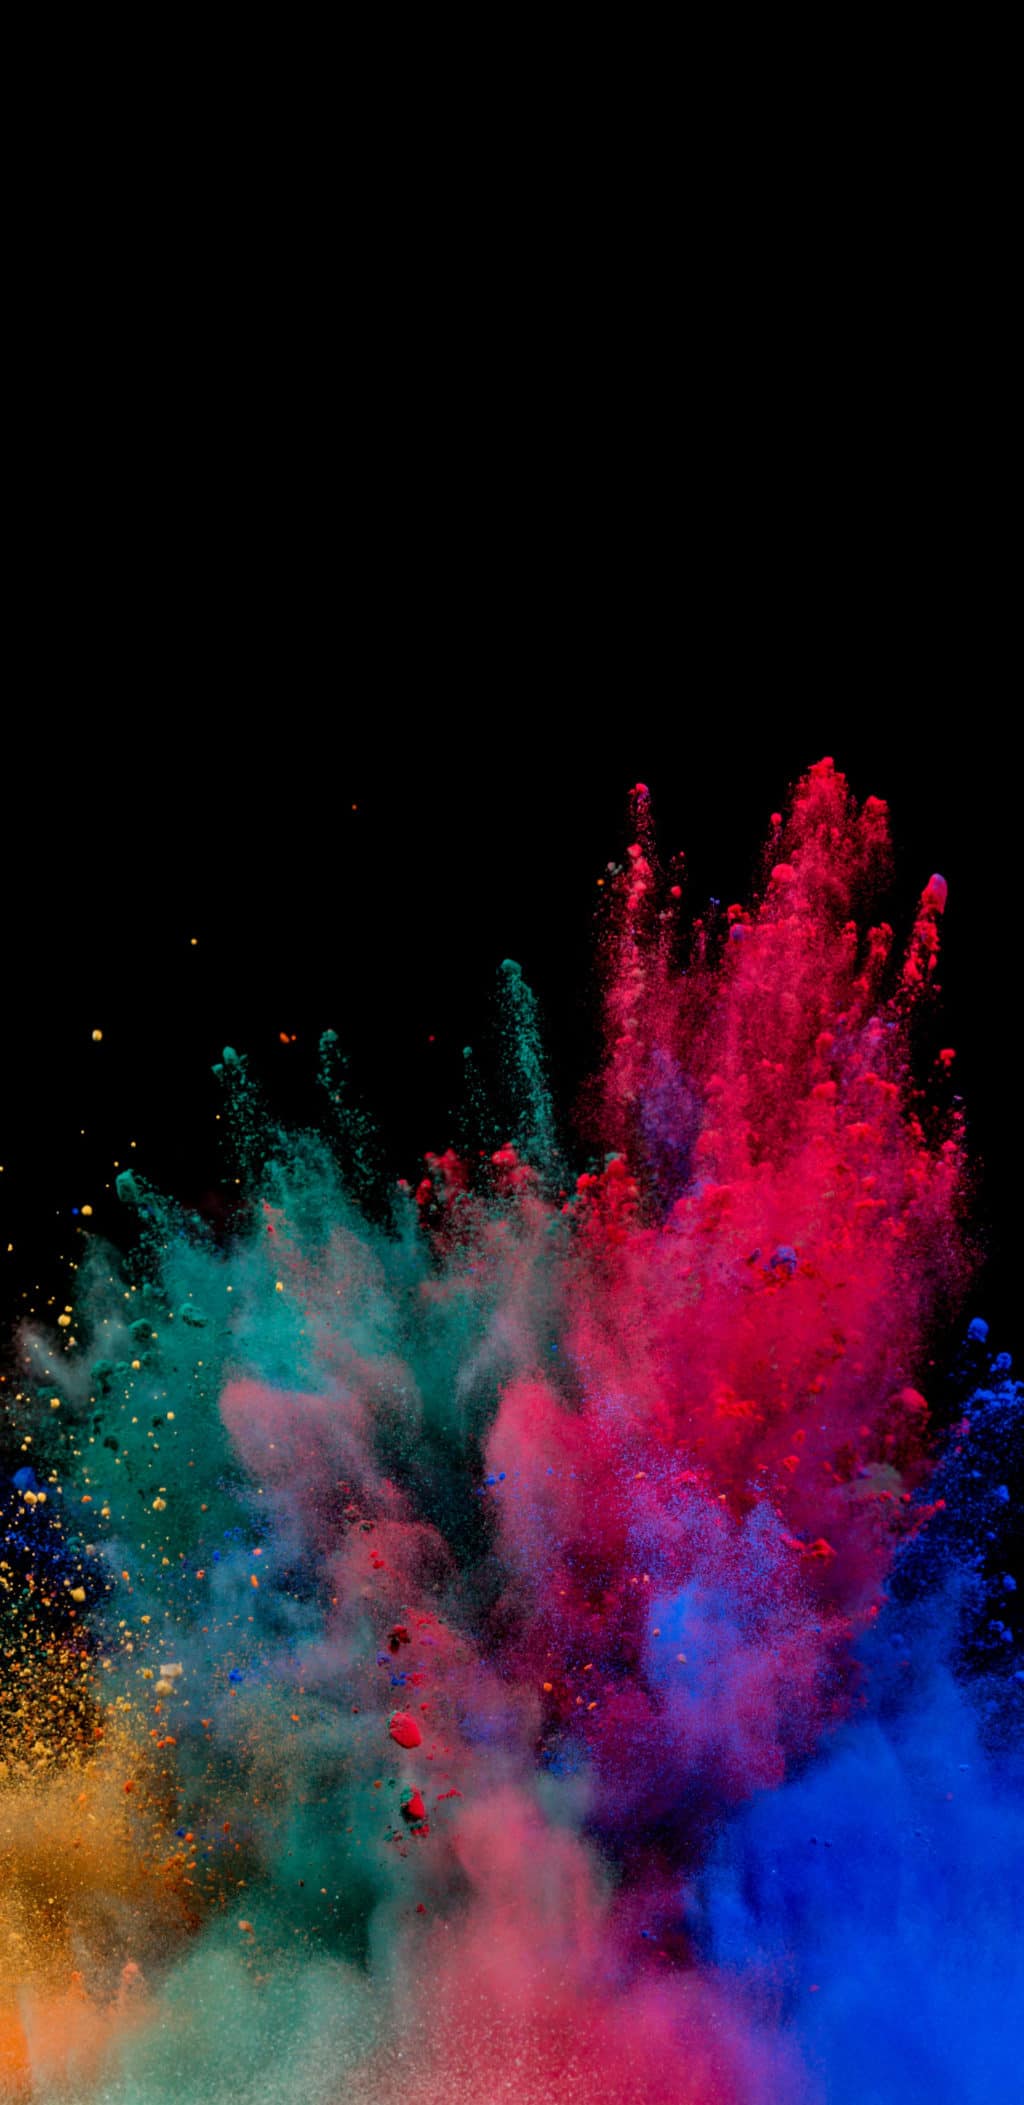 Samsung S9 Wallpapers - Top Free Samsung S9 Backgrounds - WallpaperAccess